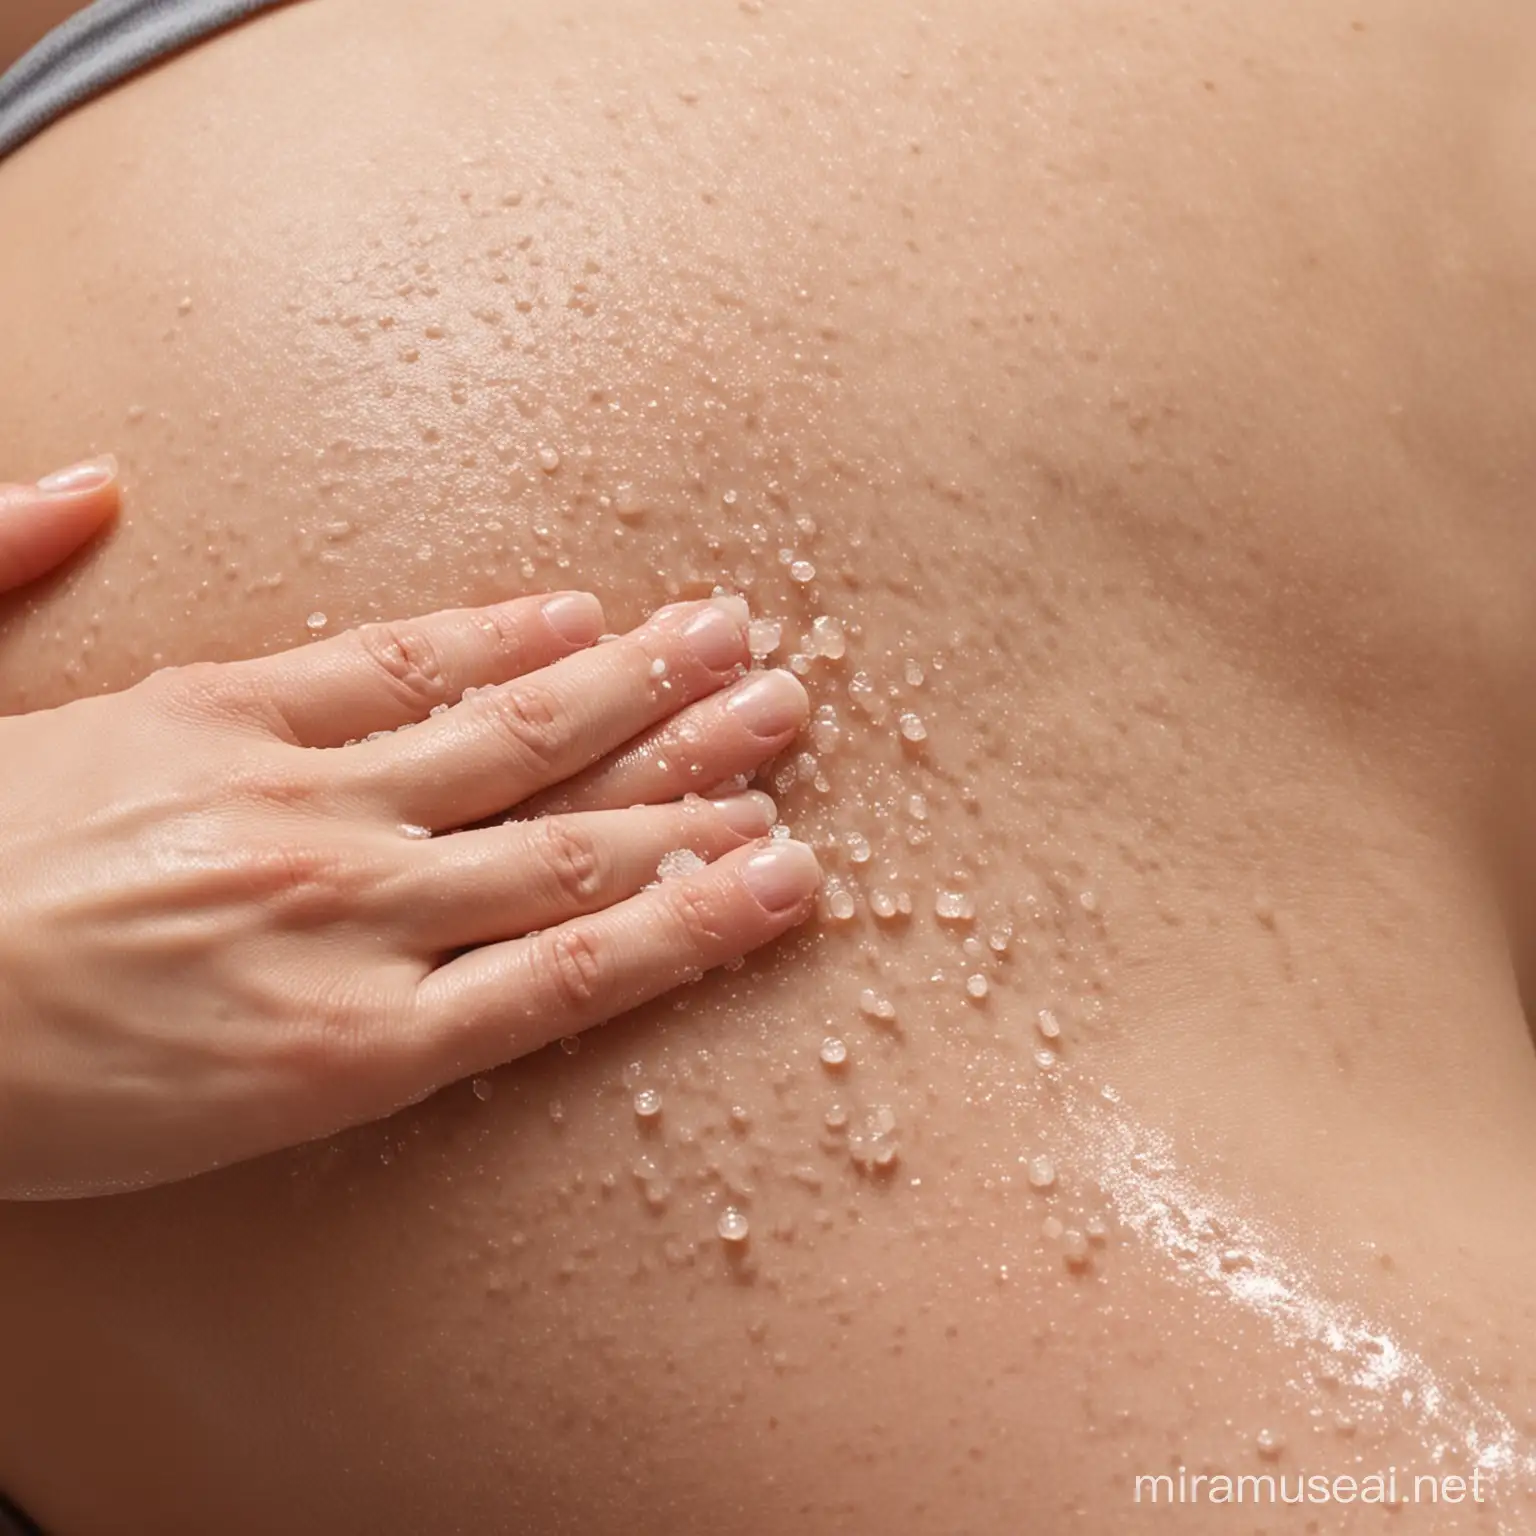 Skin Exfoliation with Scrub Demonstrating Effective Dead Skin Removal